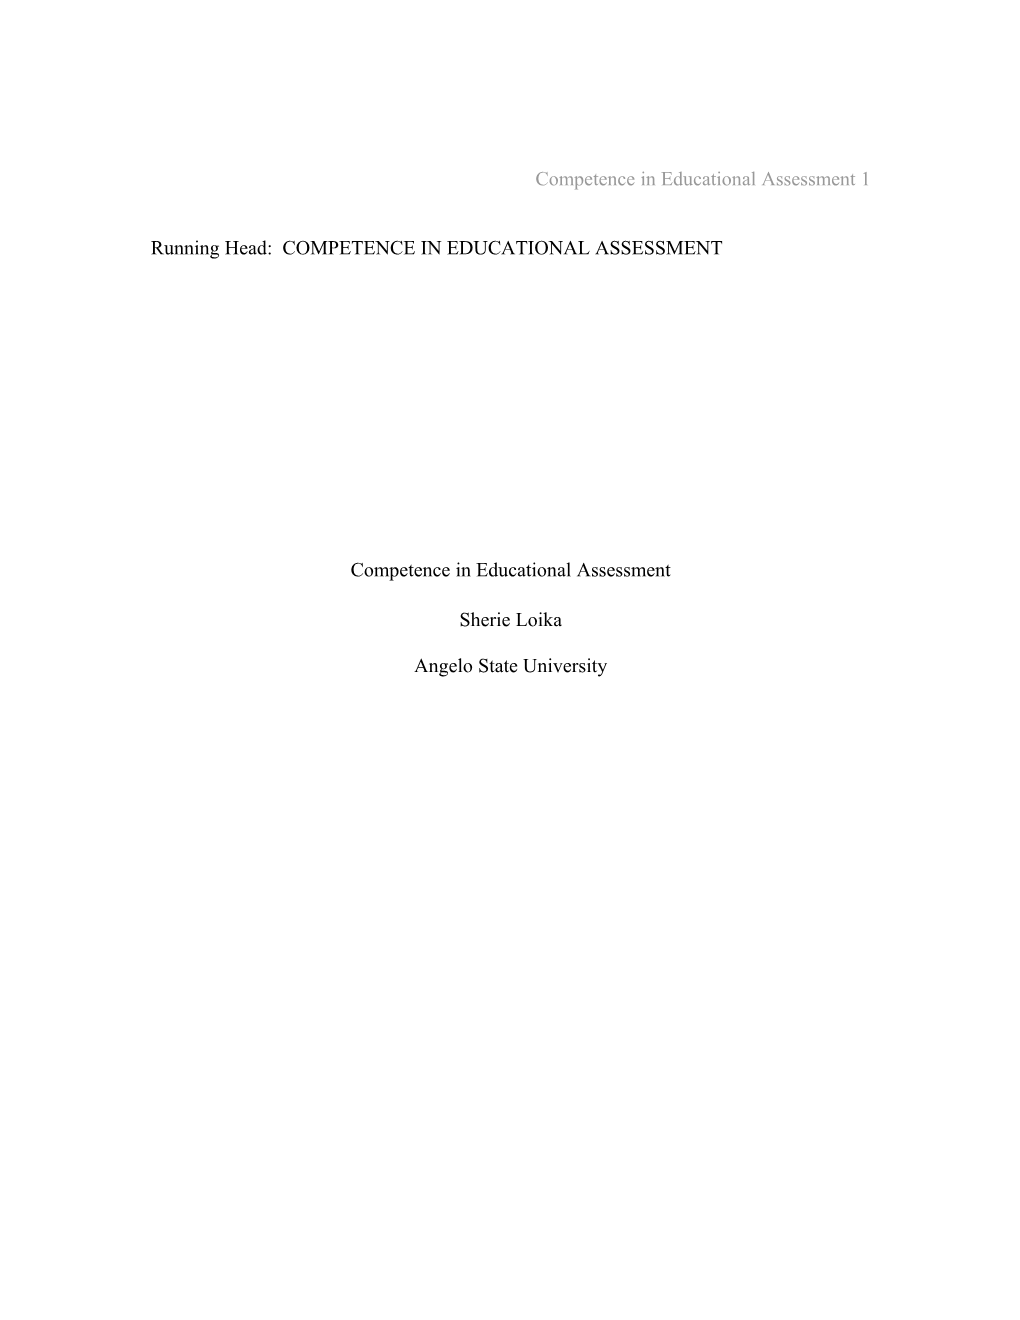 Standards for Teacher Competence in Educational Assessment of Students